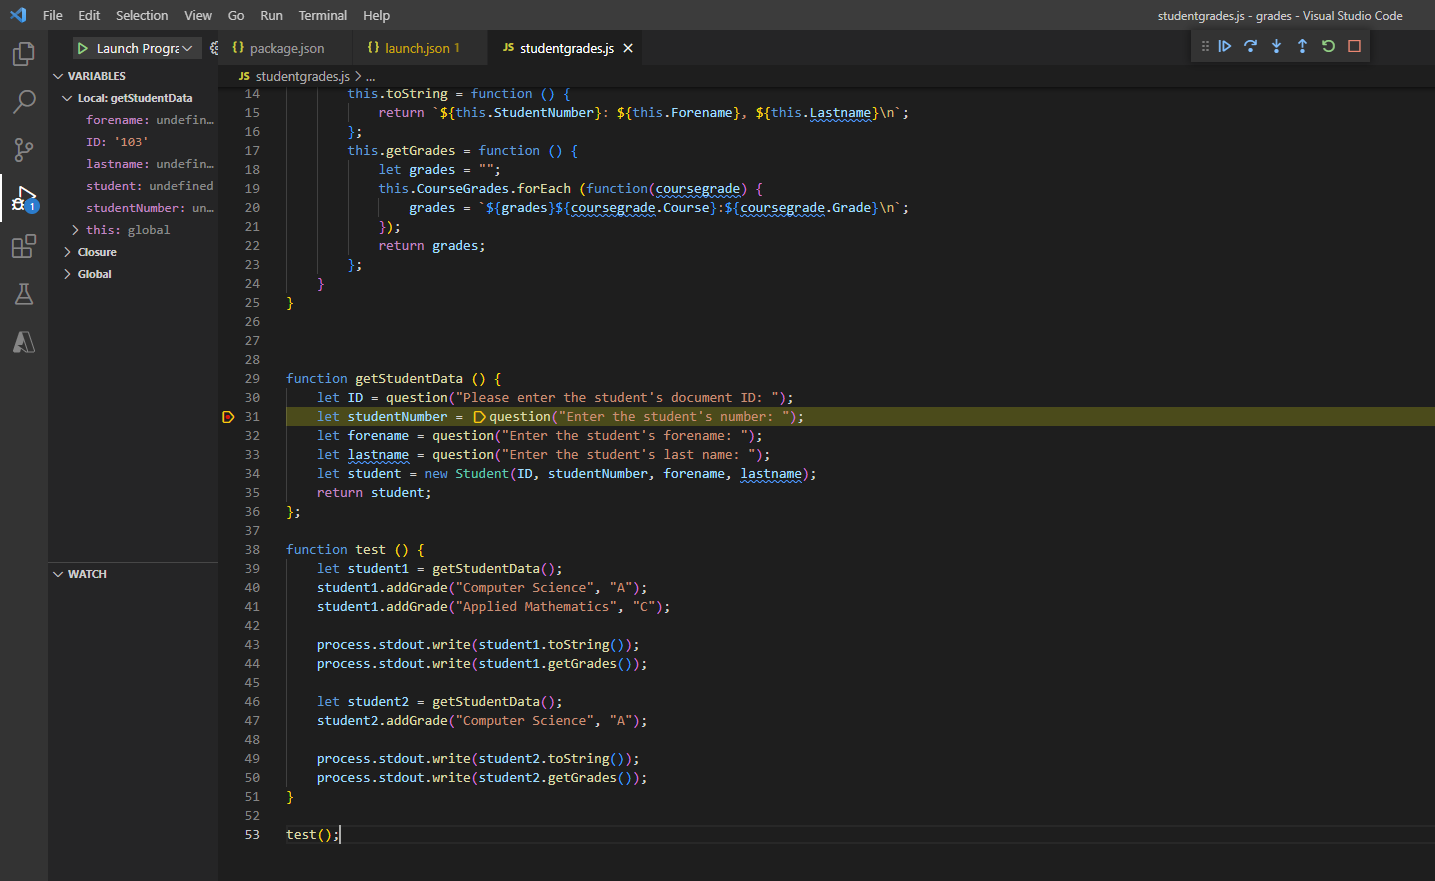 Screenshot of the Visual Studio Code debugger in action pausing at a breakpoint on some sample JavaScript code.